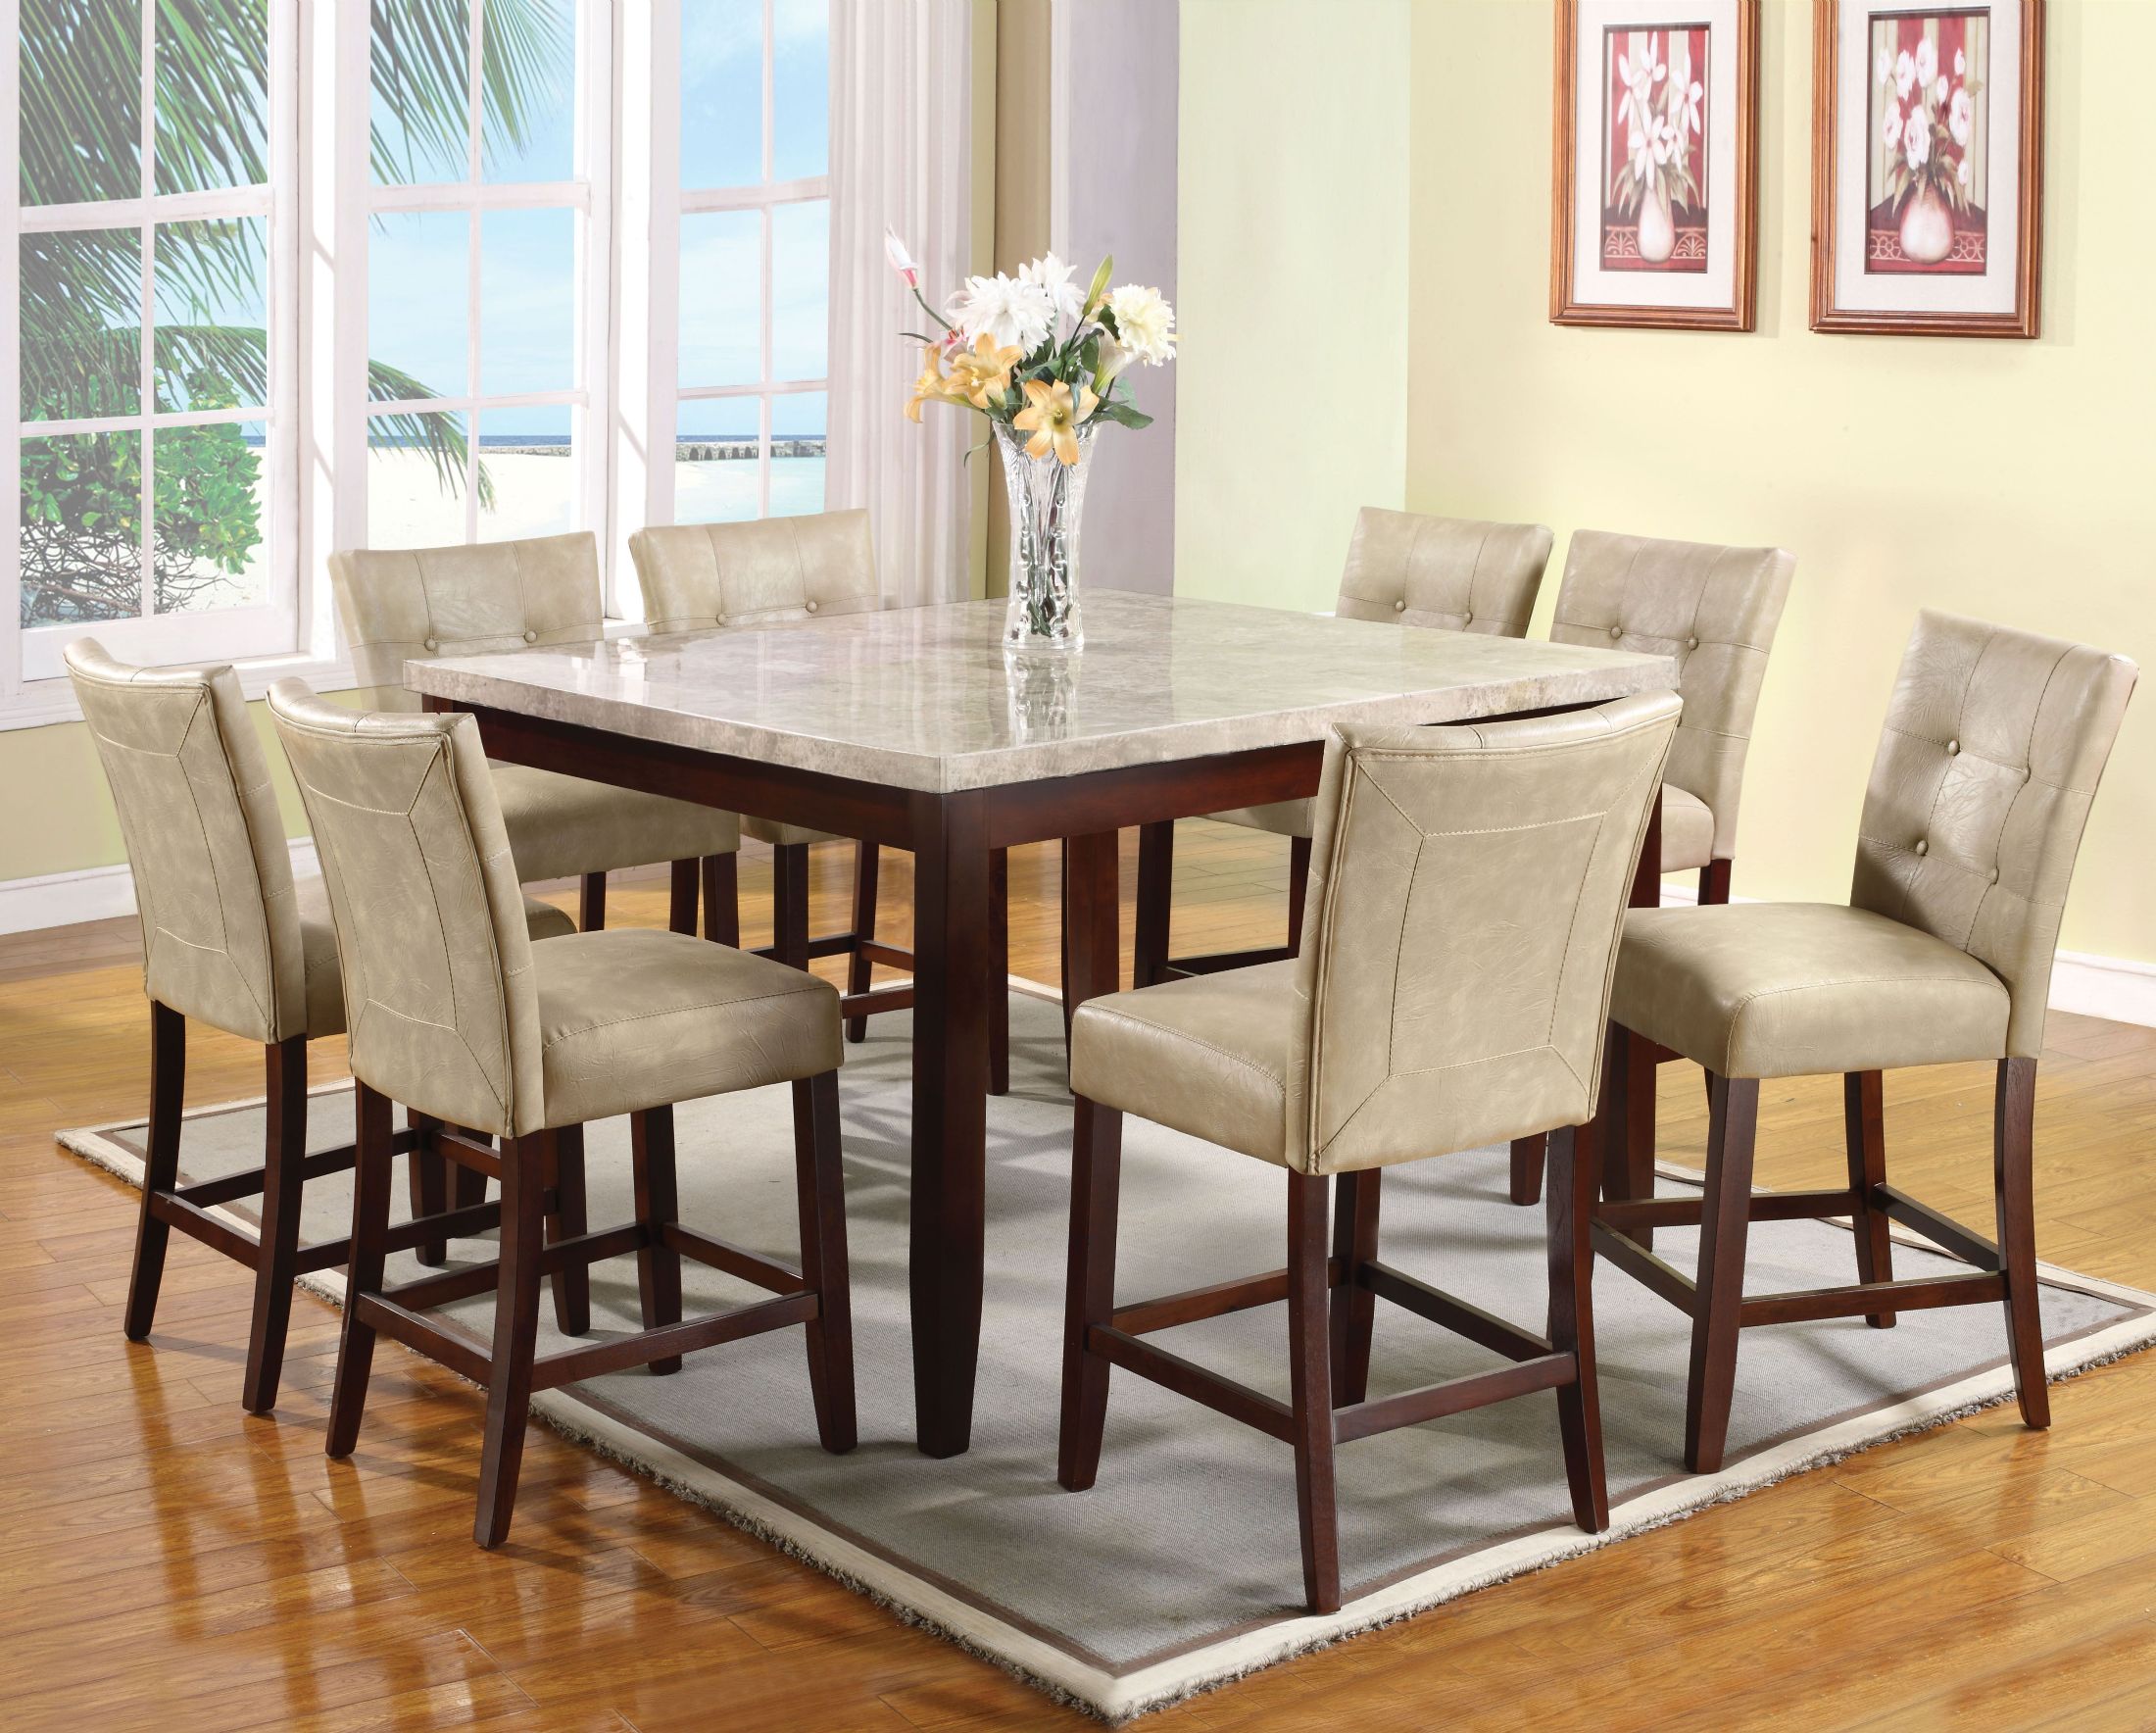 Peyton 5 Pc Counter Height Dining Room Set